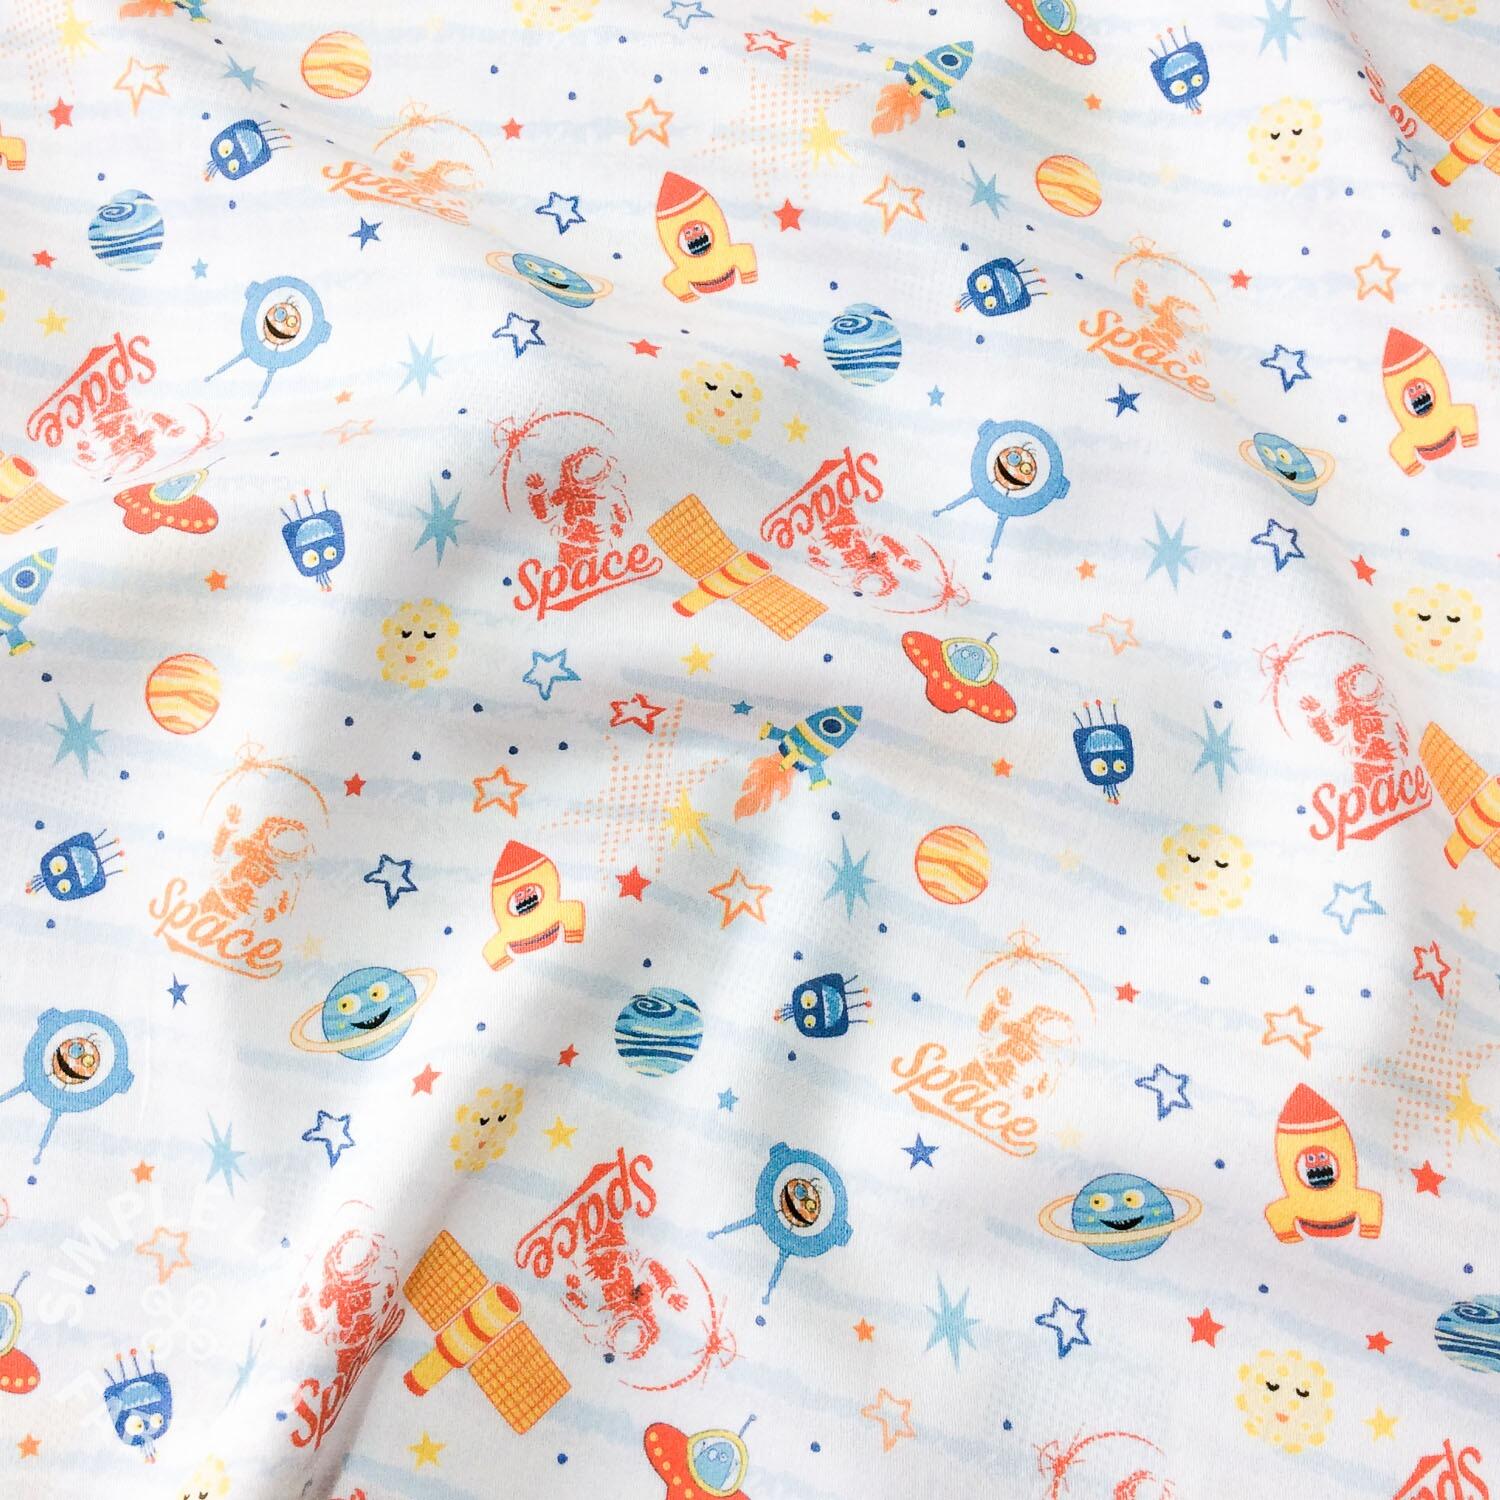 Cute space rockets planets cotton fabric